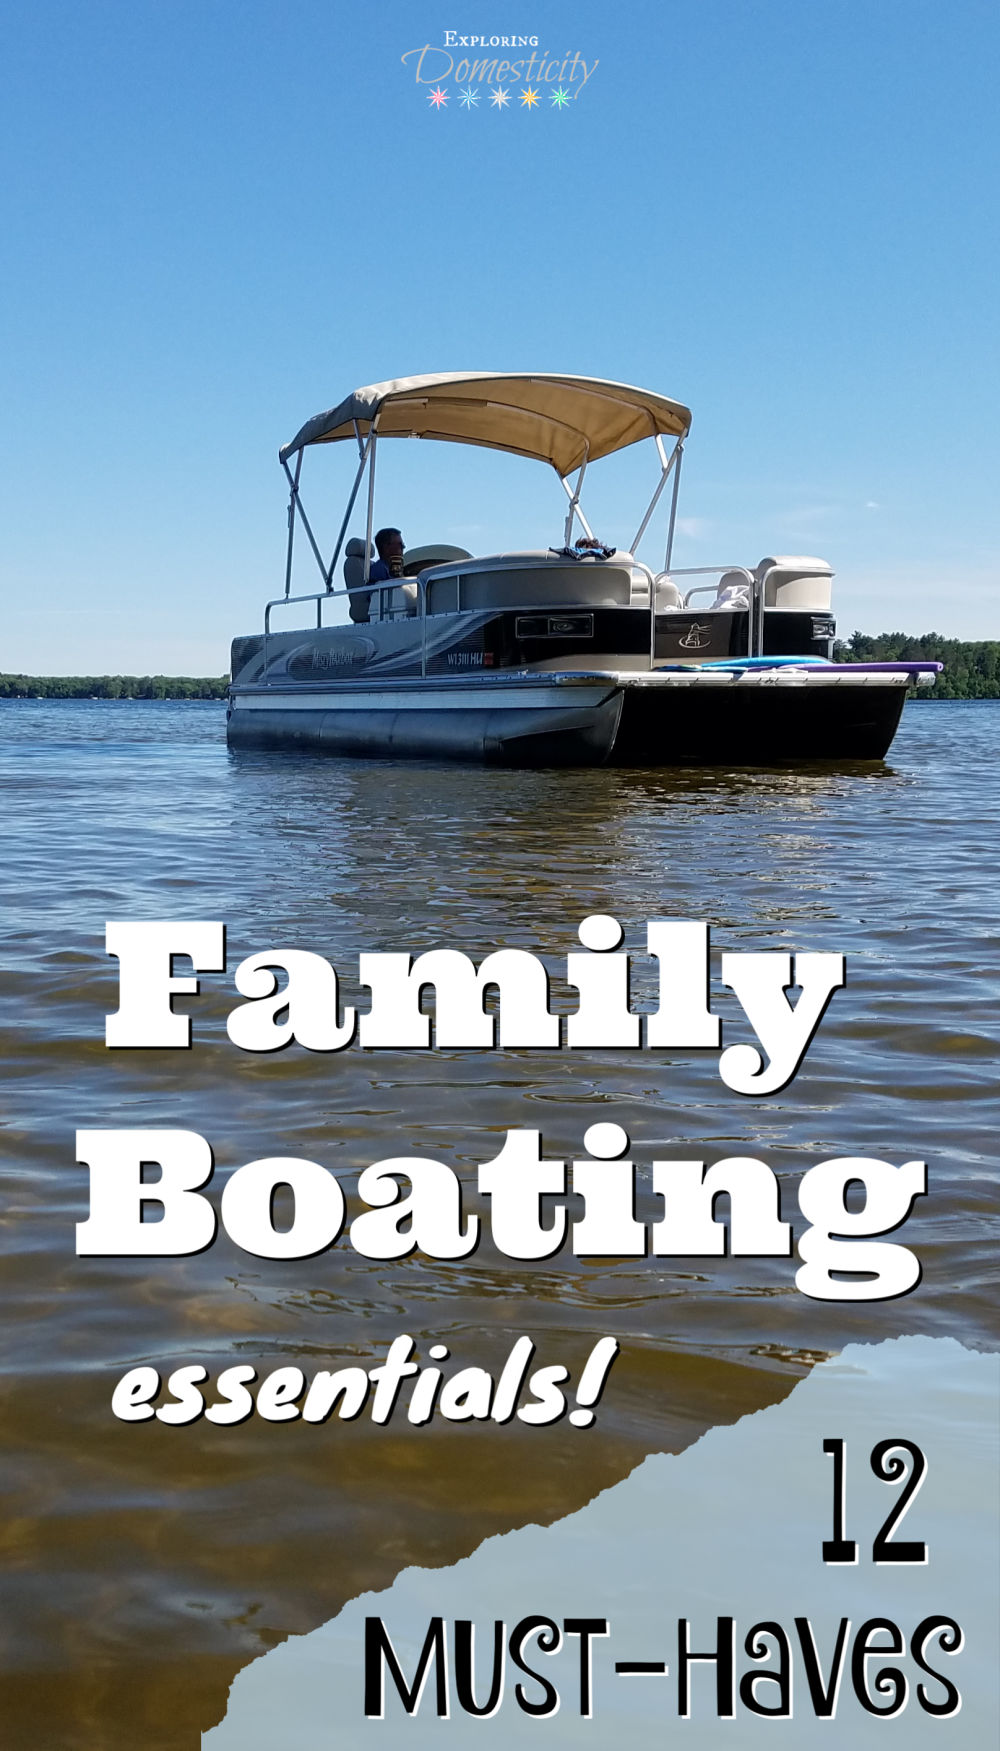 5 Must Haves to Carry in Your Boat - My Boat Life